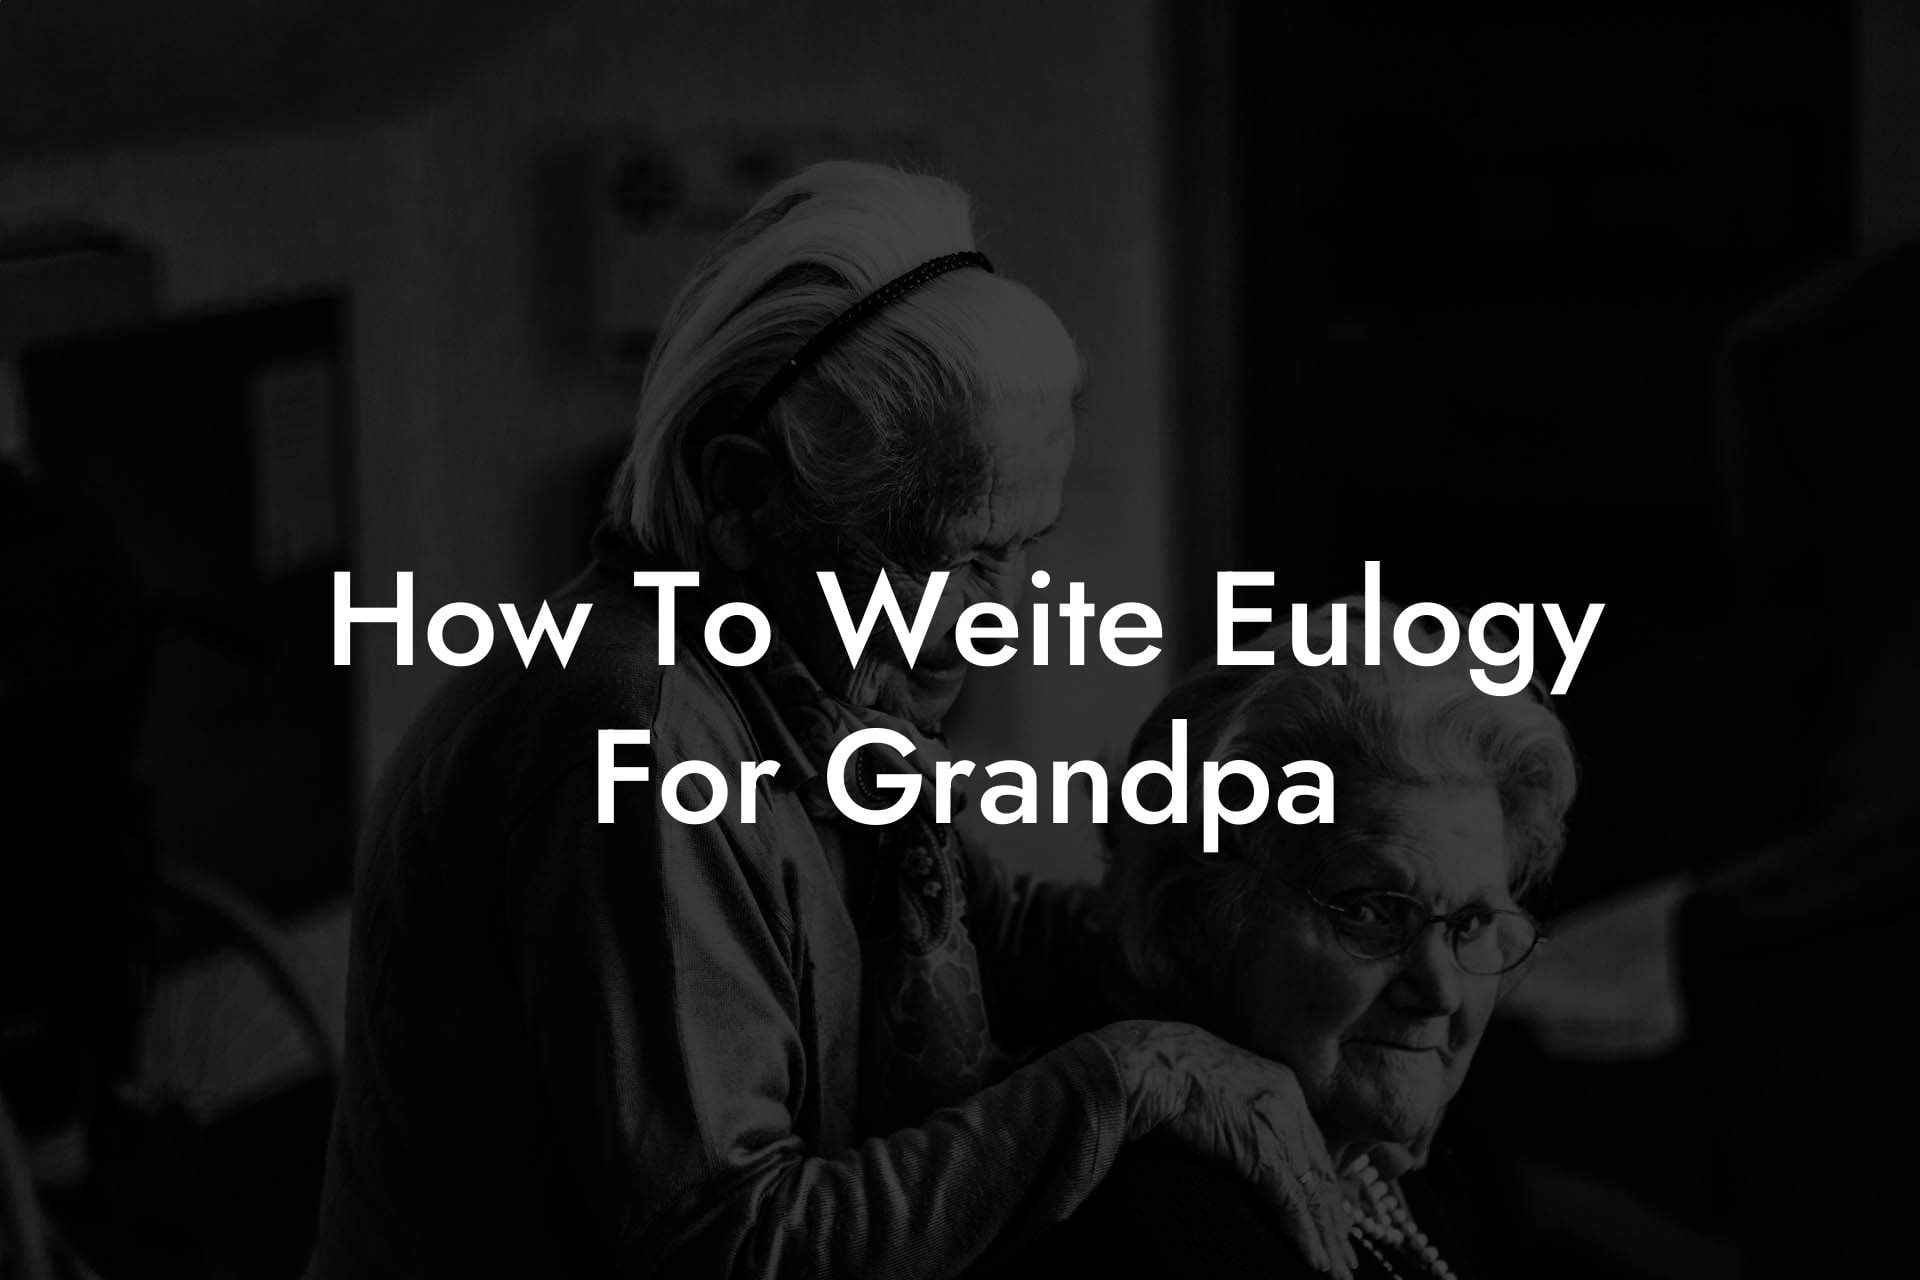 How To Weite Eulogy For Grandpa